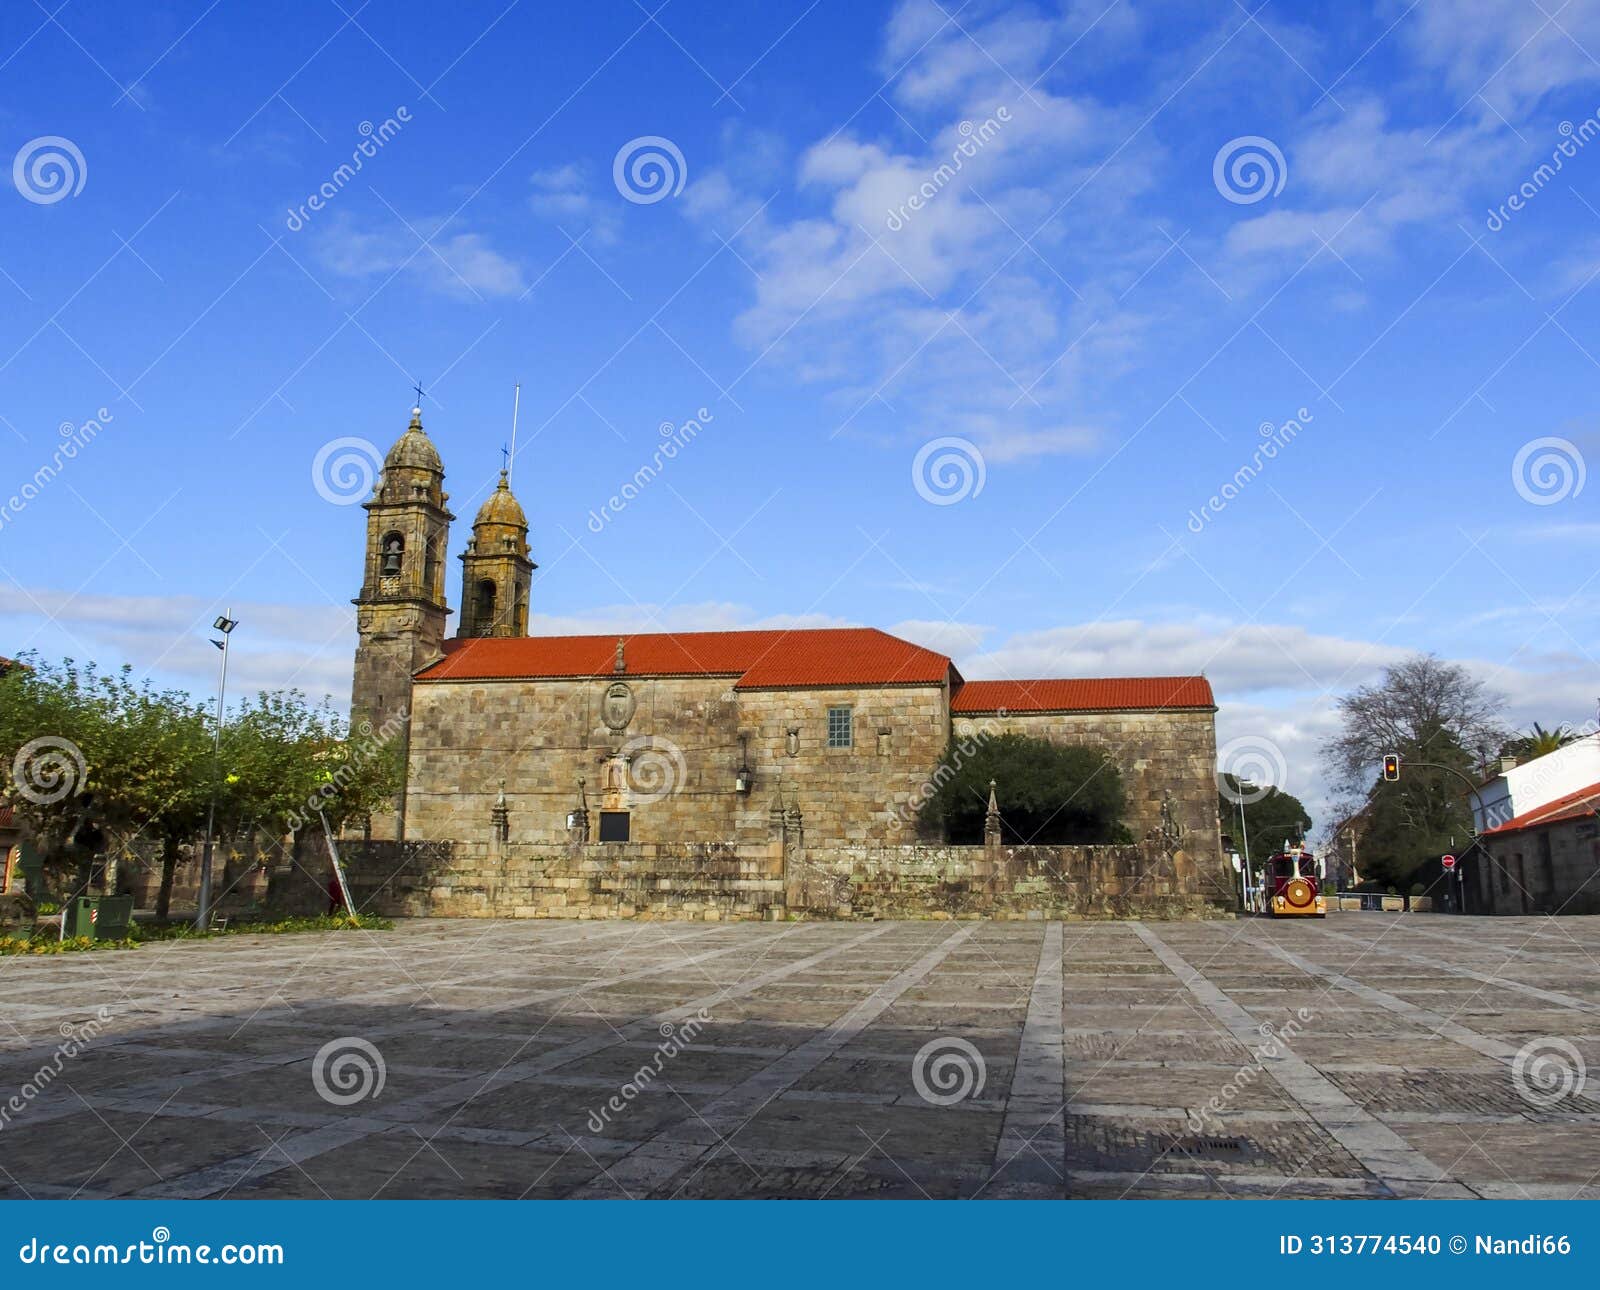 church of san benito from the 15th to the 17th century. cambados, galicia, spain.